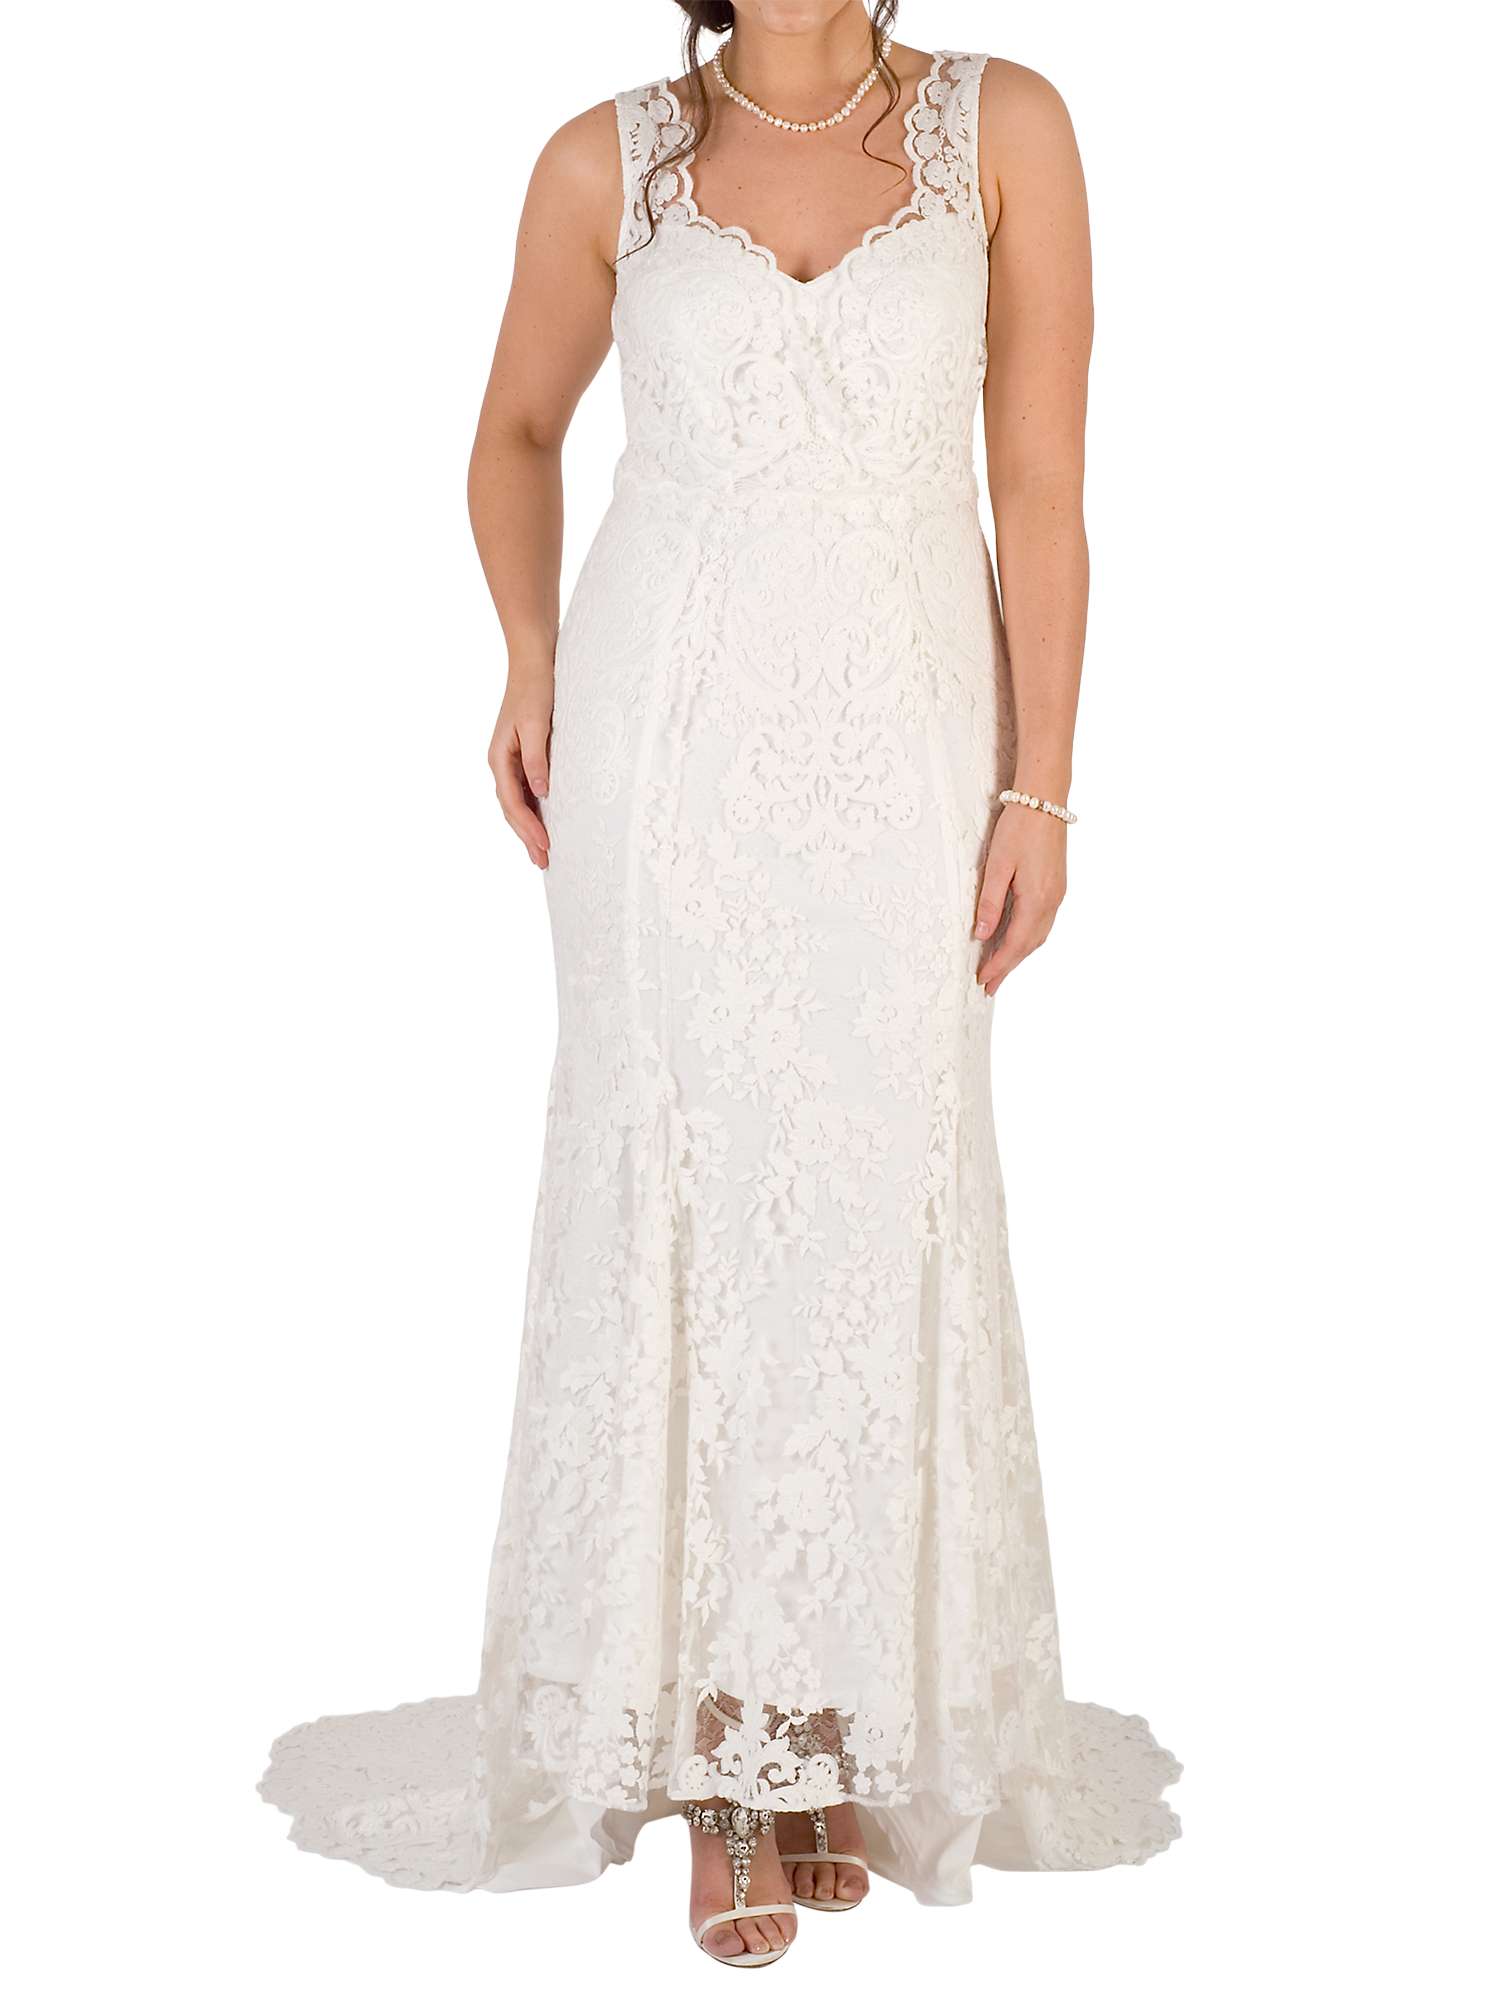 Buy Chesca Scallop Lace Wedding Dress, Ivory Online at johnlewis.com